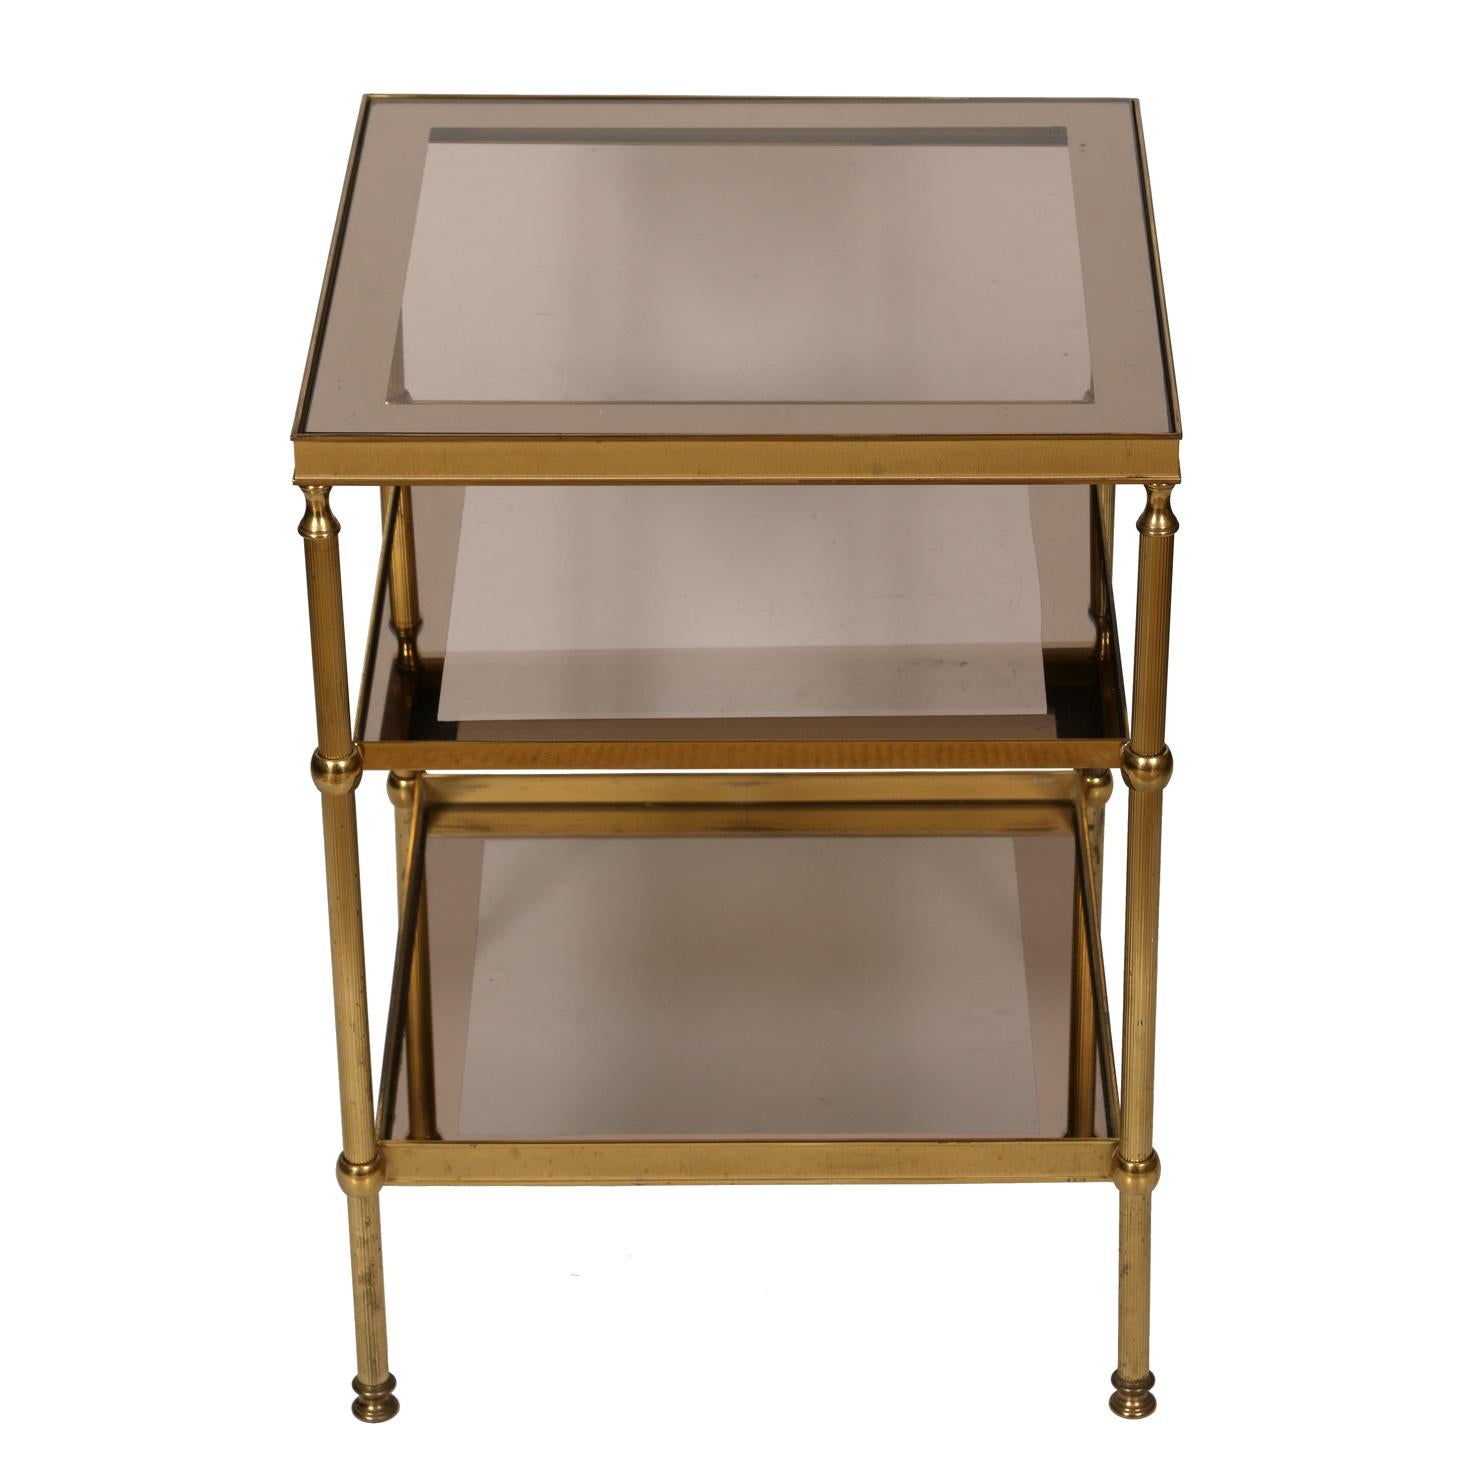 A pair of three tier French brass and bordered smoked glass side tables, circa 1950.